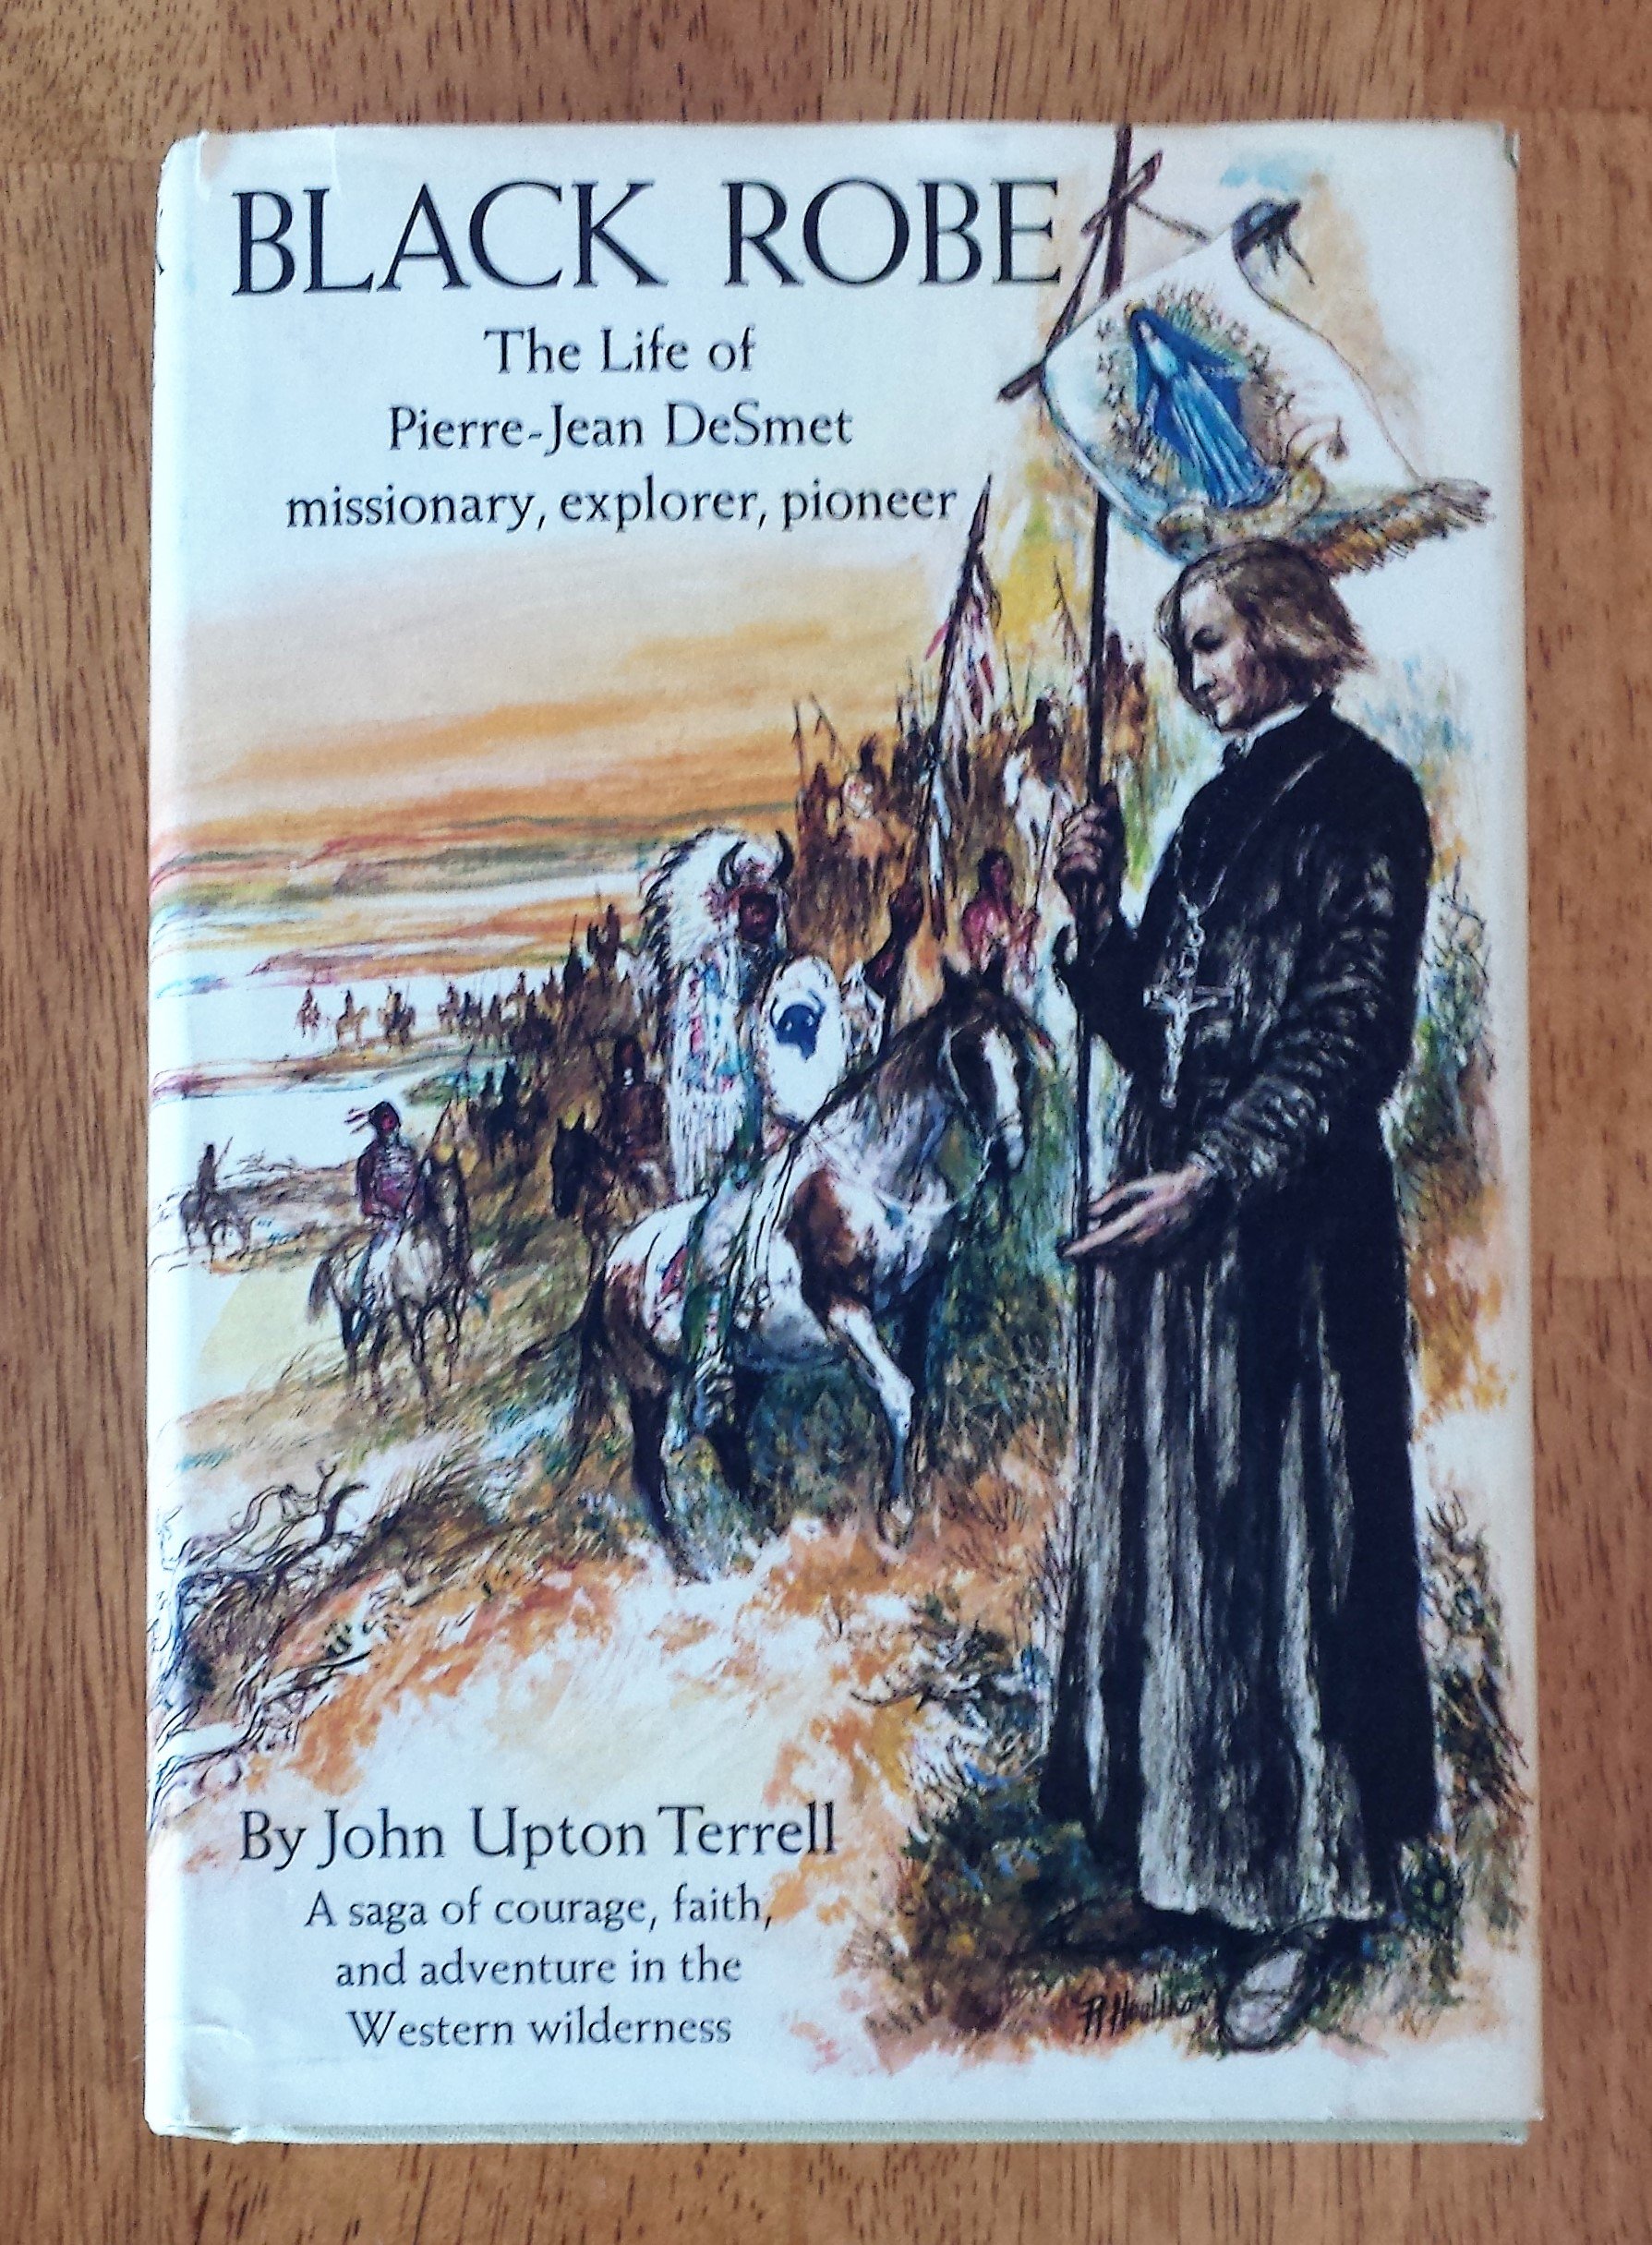 Black robe: The life of Pierre-Jean de Smet, missionary, explorer & pioneer (book cover)